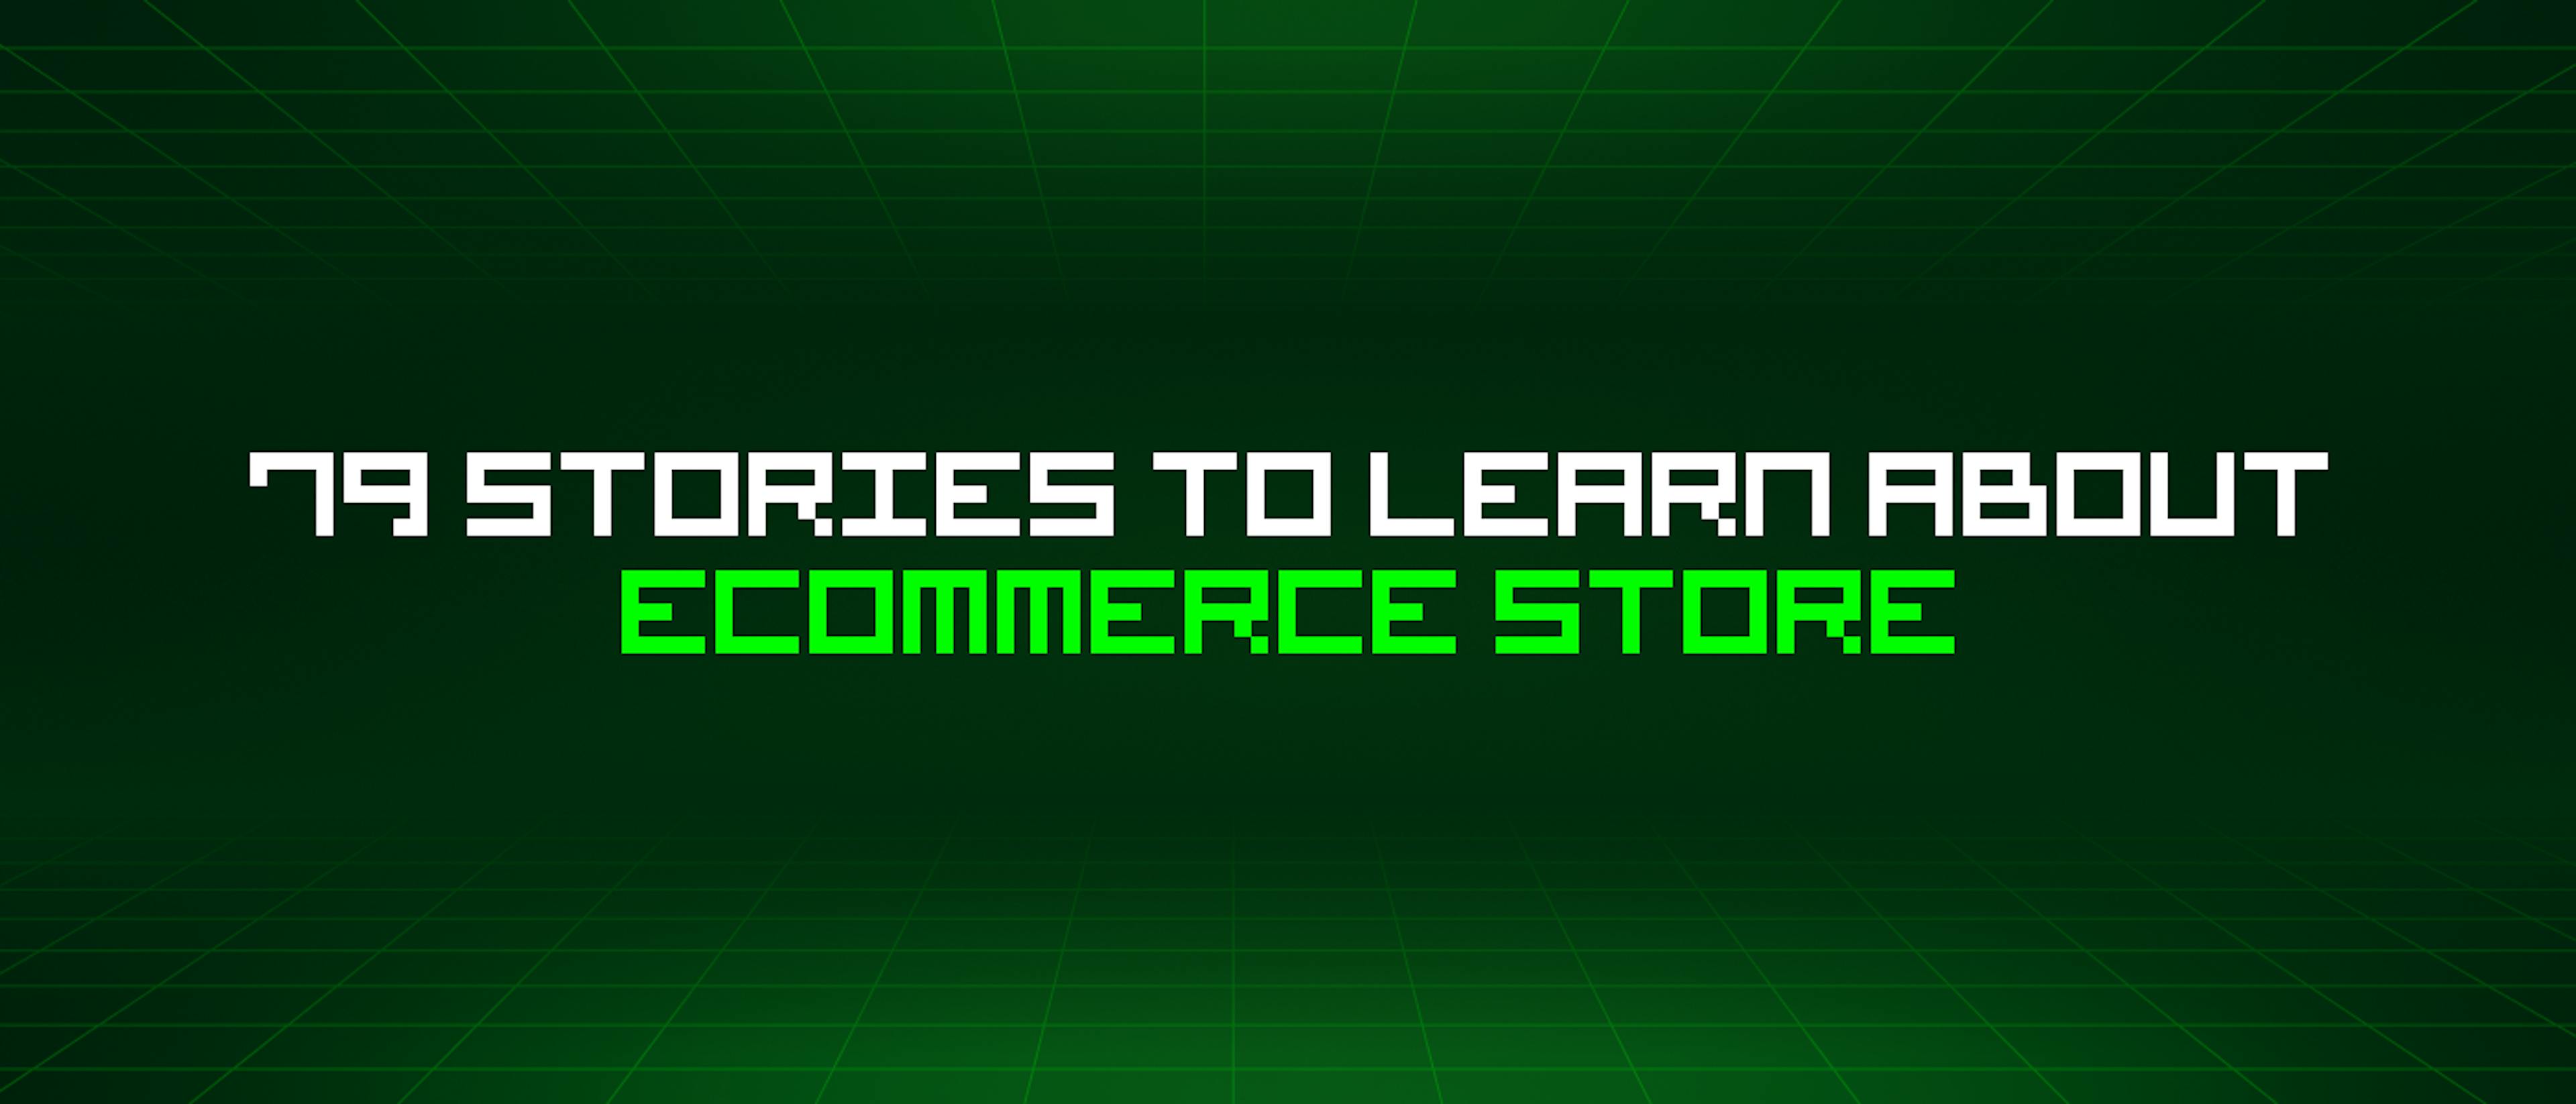 featured image - 79 Stories To Learn About Ecommerce Store